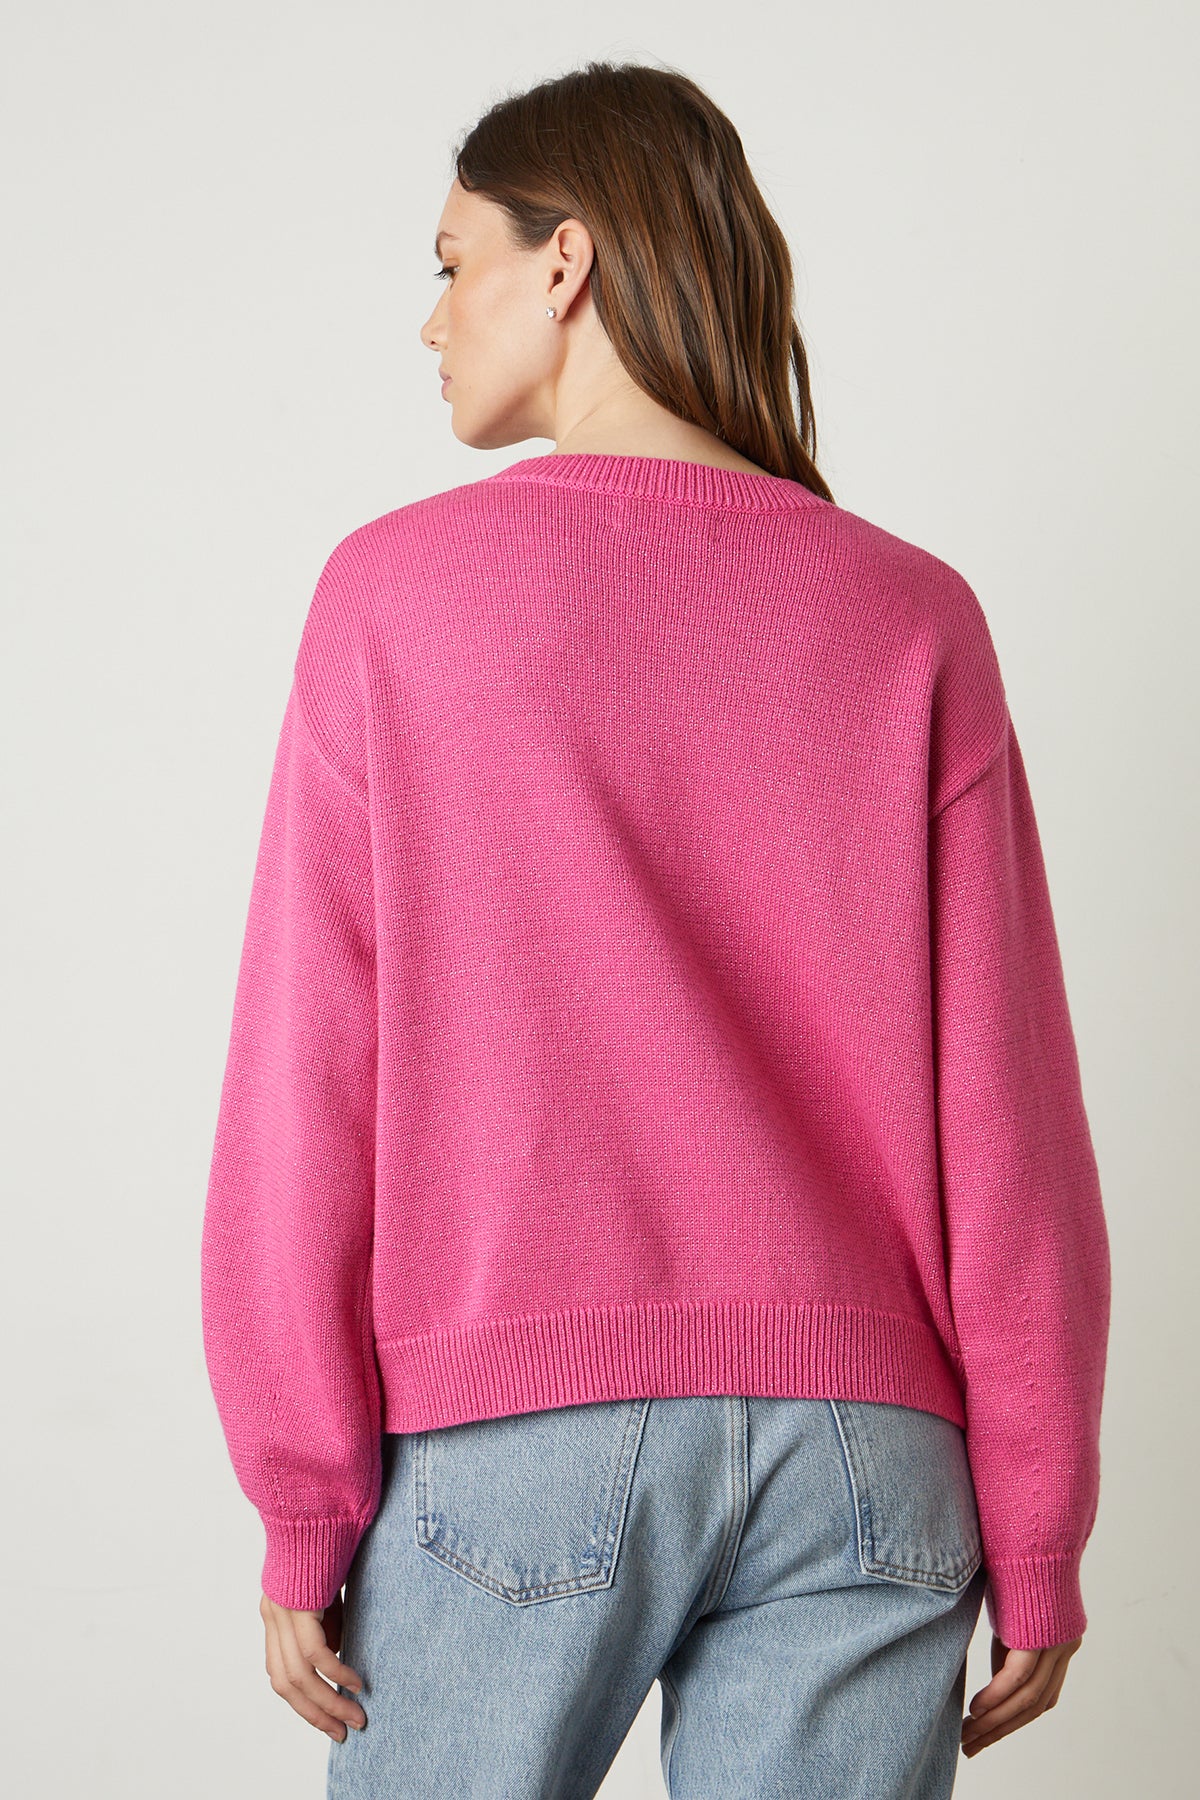   Hallie Crew Neck Sweater in bright candy pink with blue denim back 